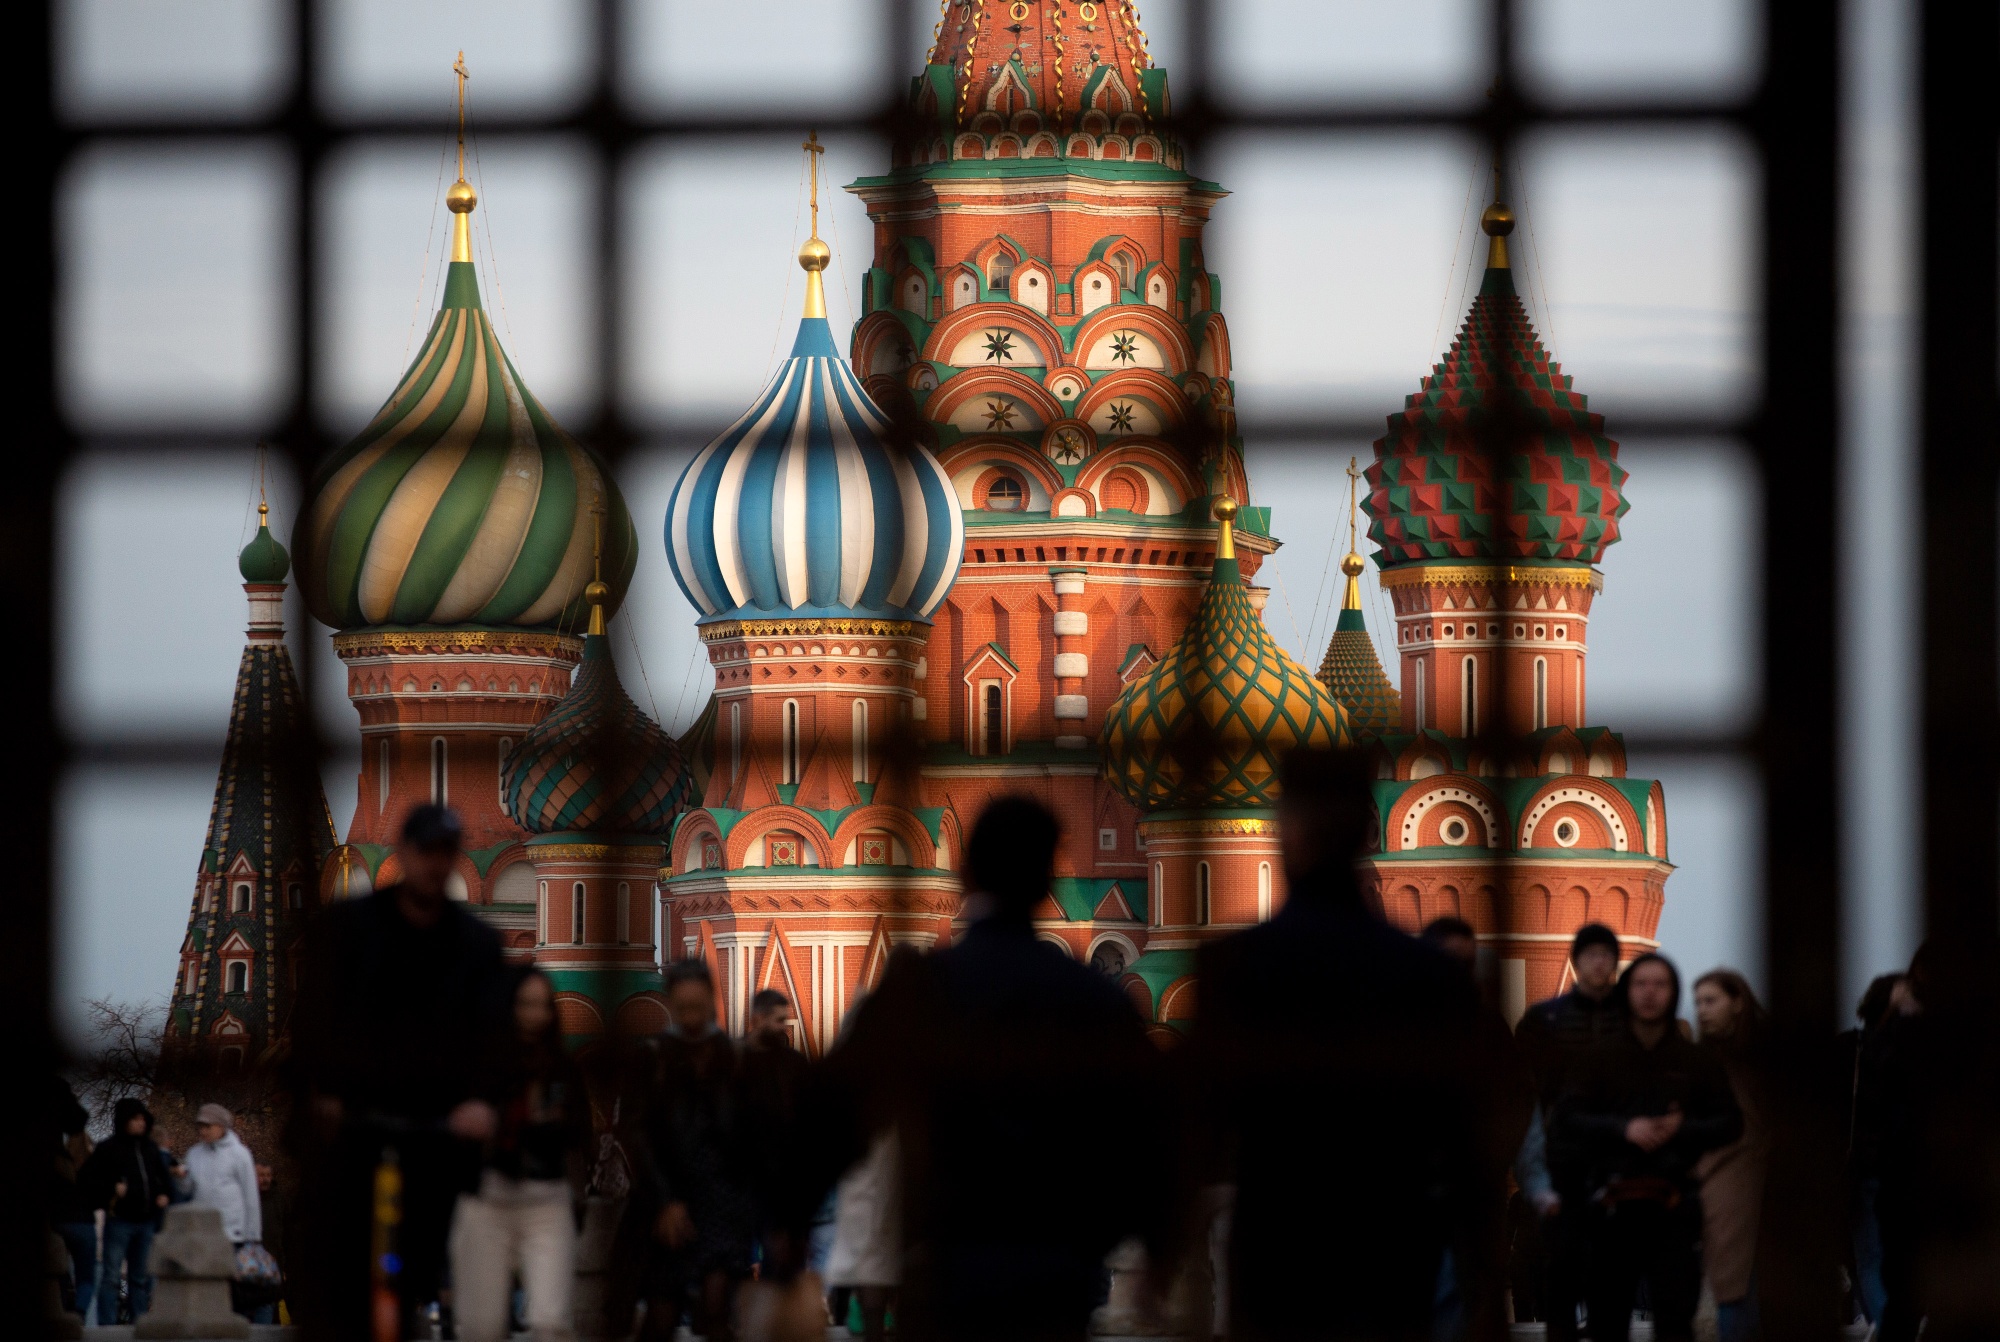 Pedestrians walk by Saint Basil's Cathedral on Red Square in Moscow, Russia.